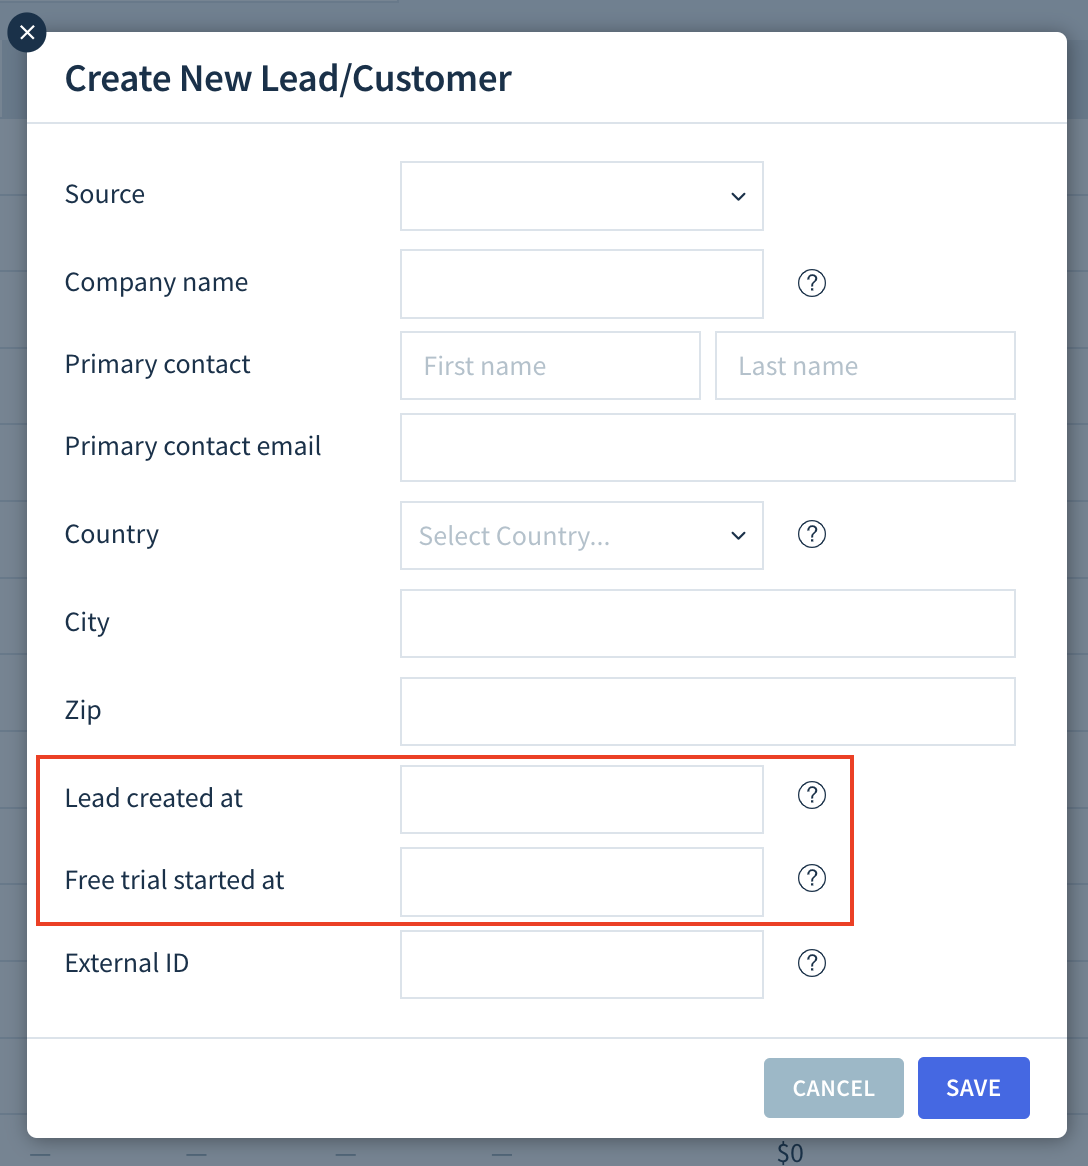 Screenshot of the Create New Lead/Customer dialog with two fields highlighted: Lead created at and Free trial started at.